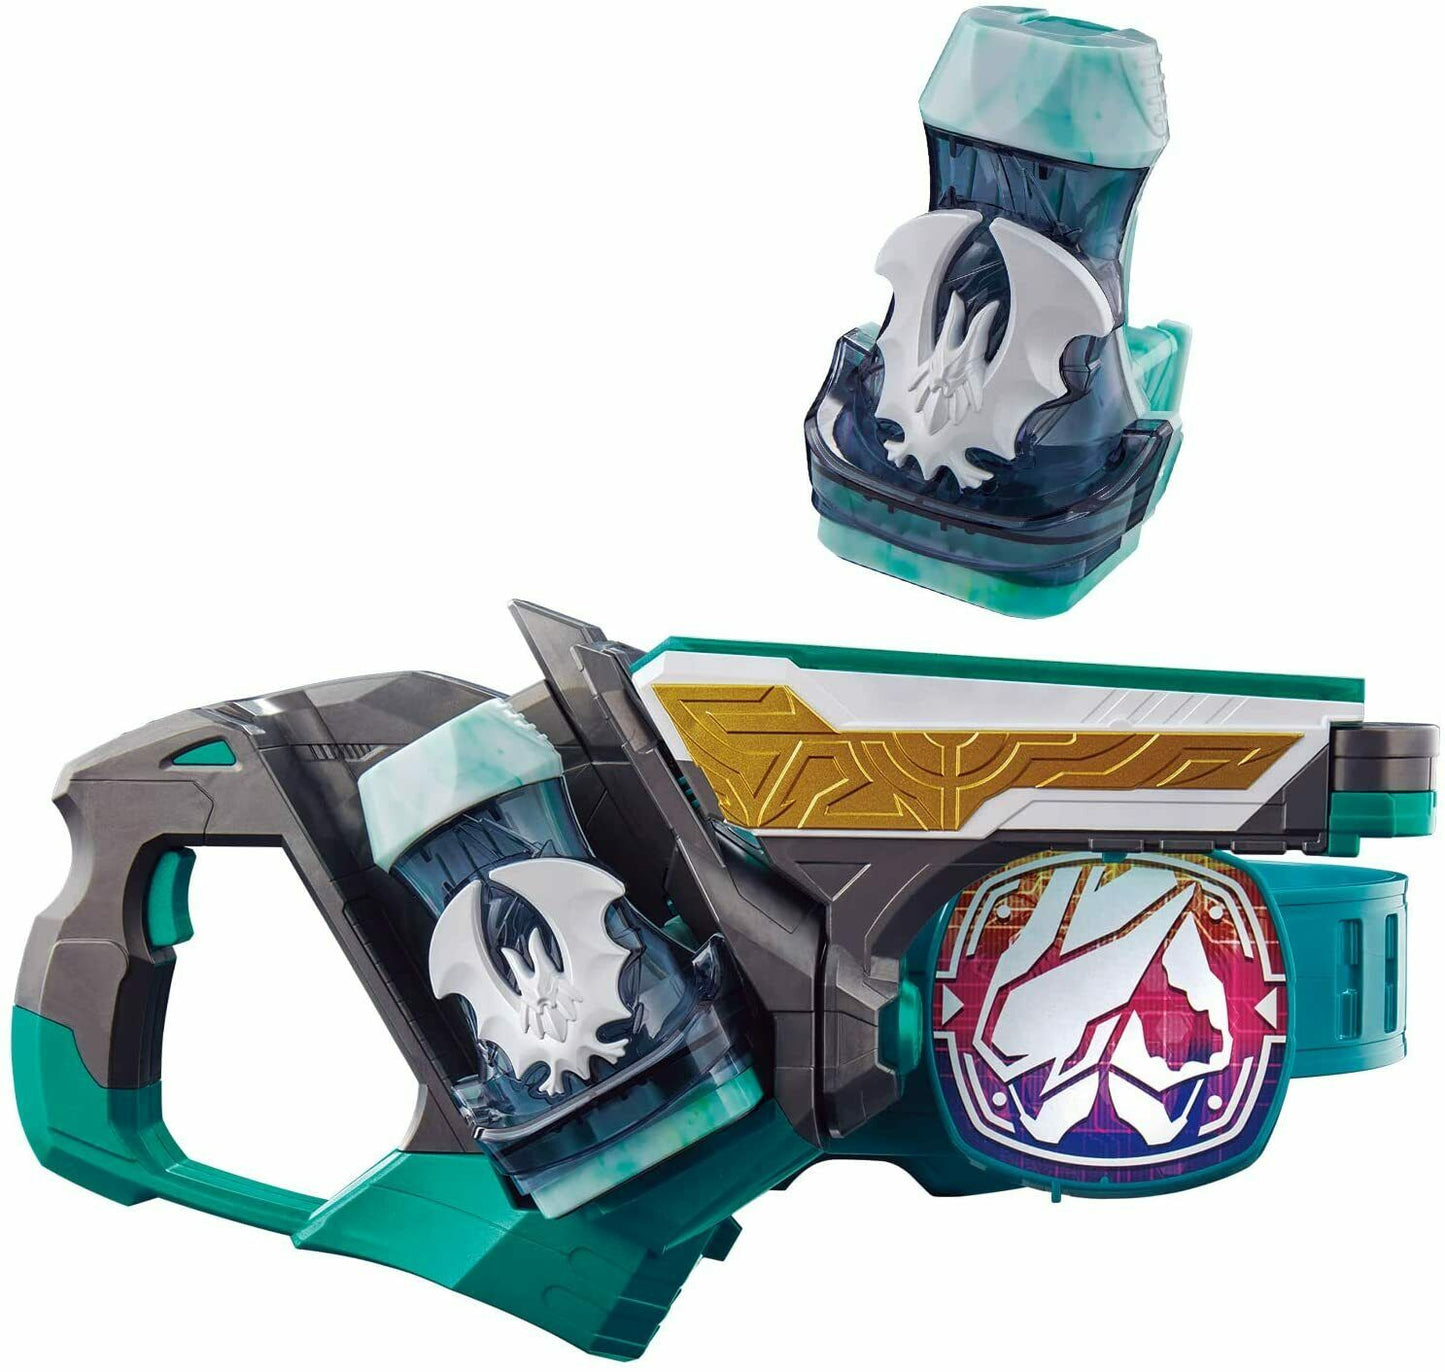 [PRE-ORDER] Kamen Rider Revice DX Two Sidriver